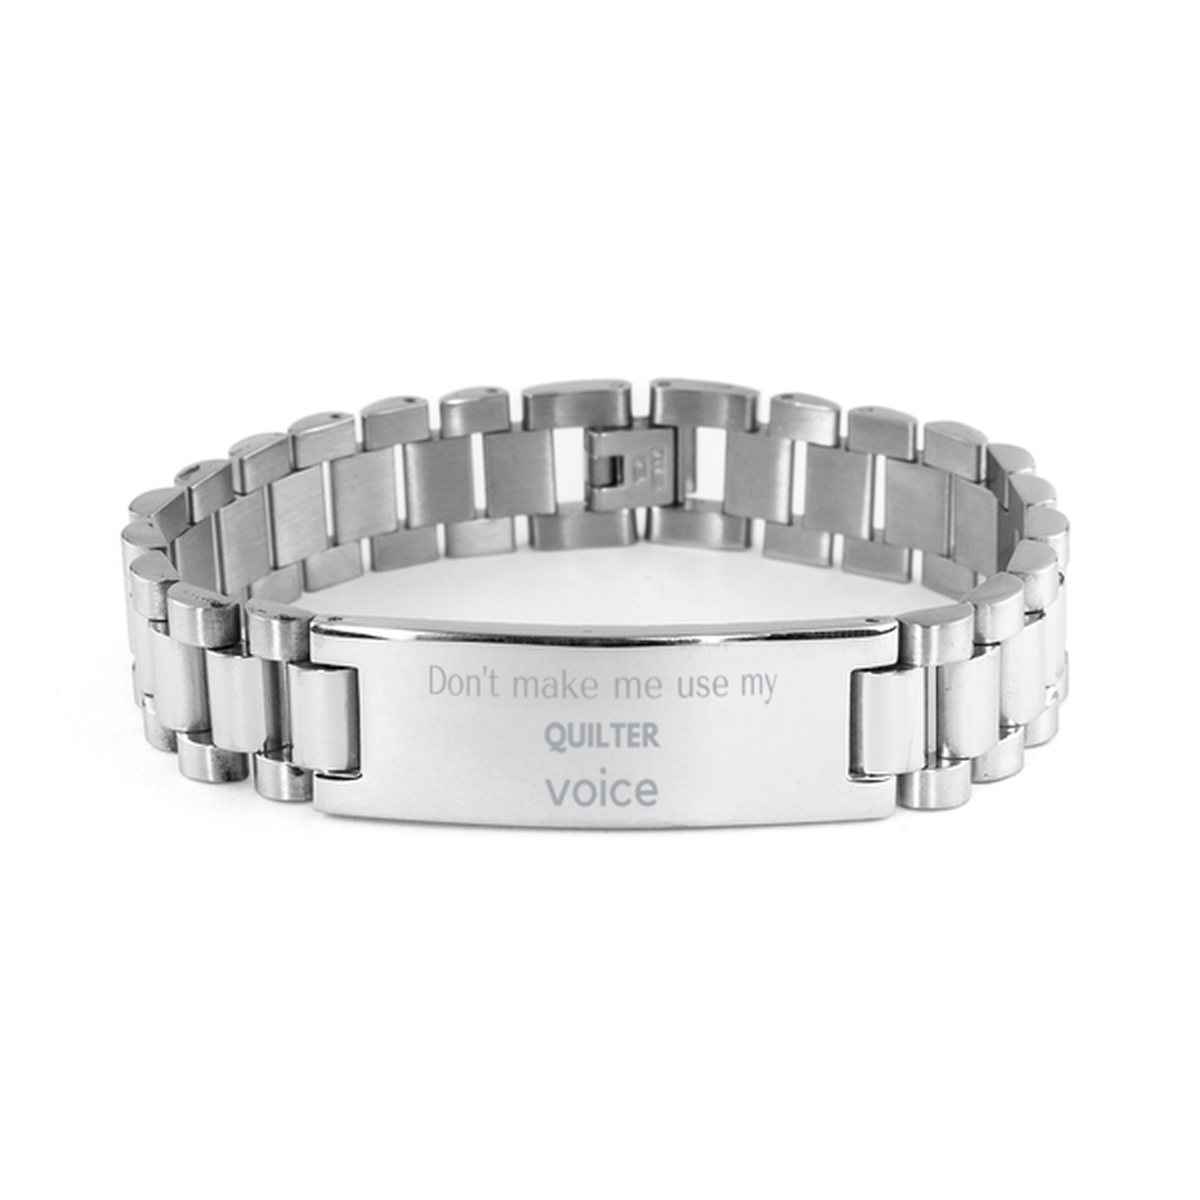 Don't make me use my Quilter voice, Sarcasm Quilter Gifts, Christmas Quilter Ladder Stainless Steel Bracelet Birthday Unique Gifts For Quilter Coworkers, Men, Women, Colleague, Friends